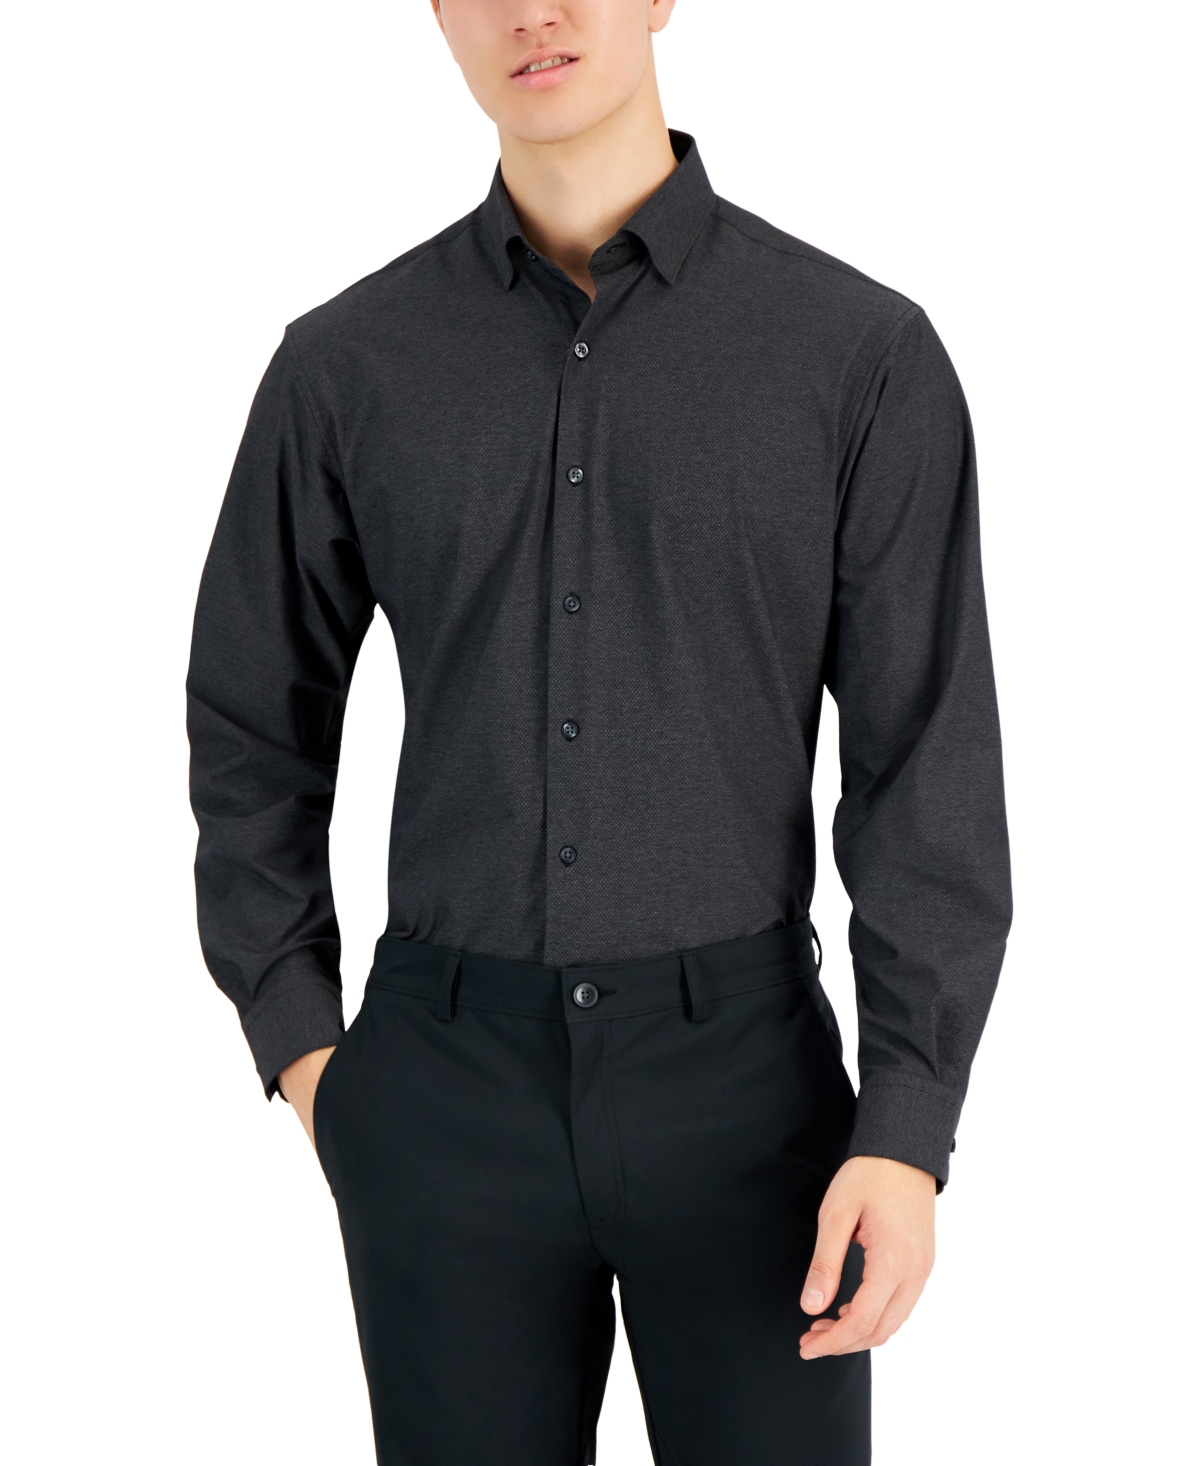 Men's Regular Fit Travel Ready Solid Dress Shirt, Created for Macy's - Deep Black